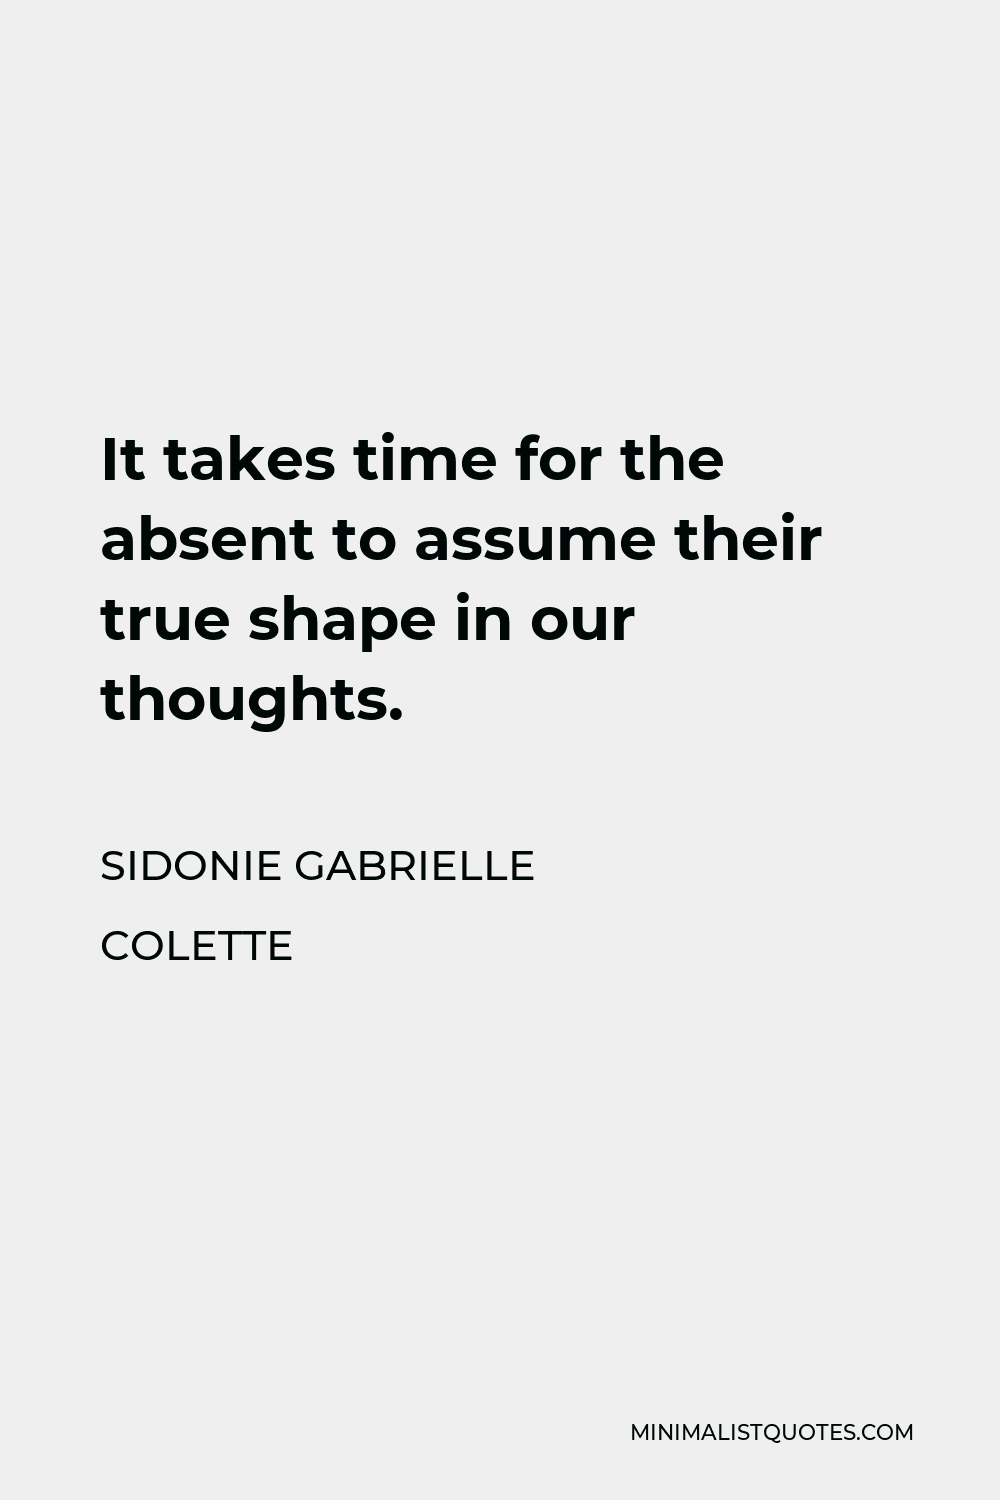 Sidonie Gabrielle Colette Quote - It takes time for the absent to assume their true shape in our thoughts.